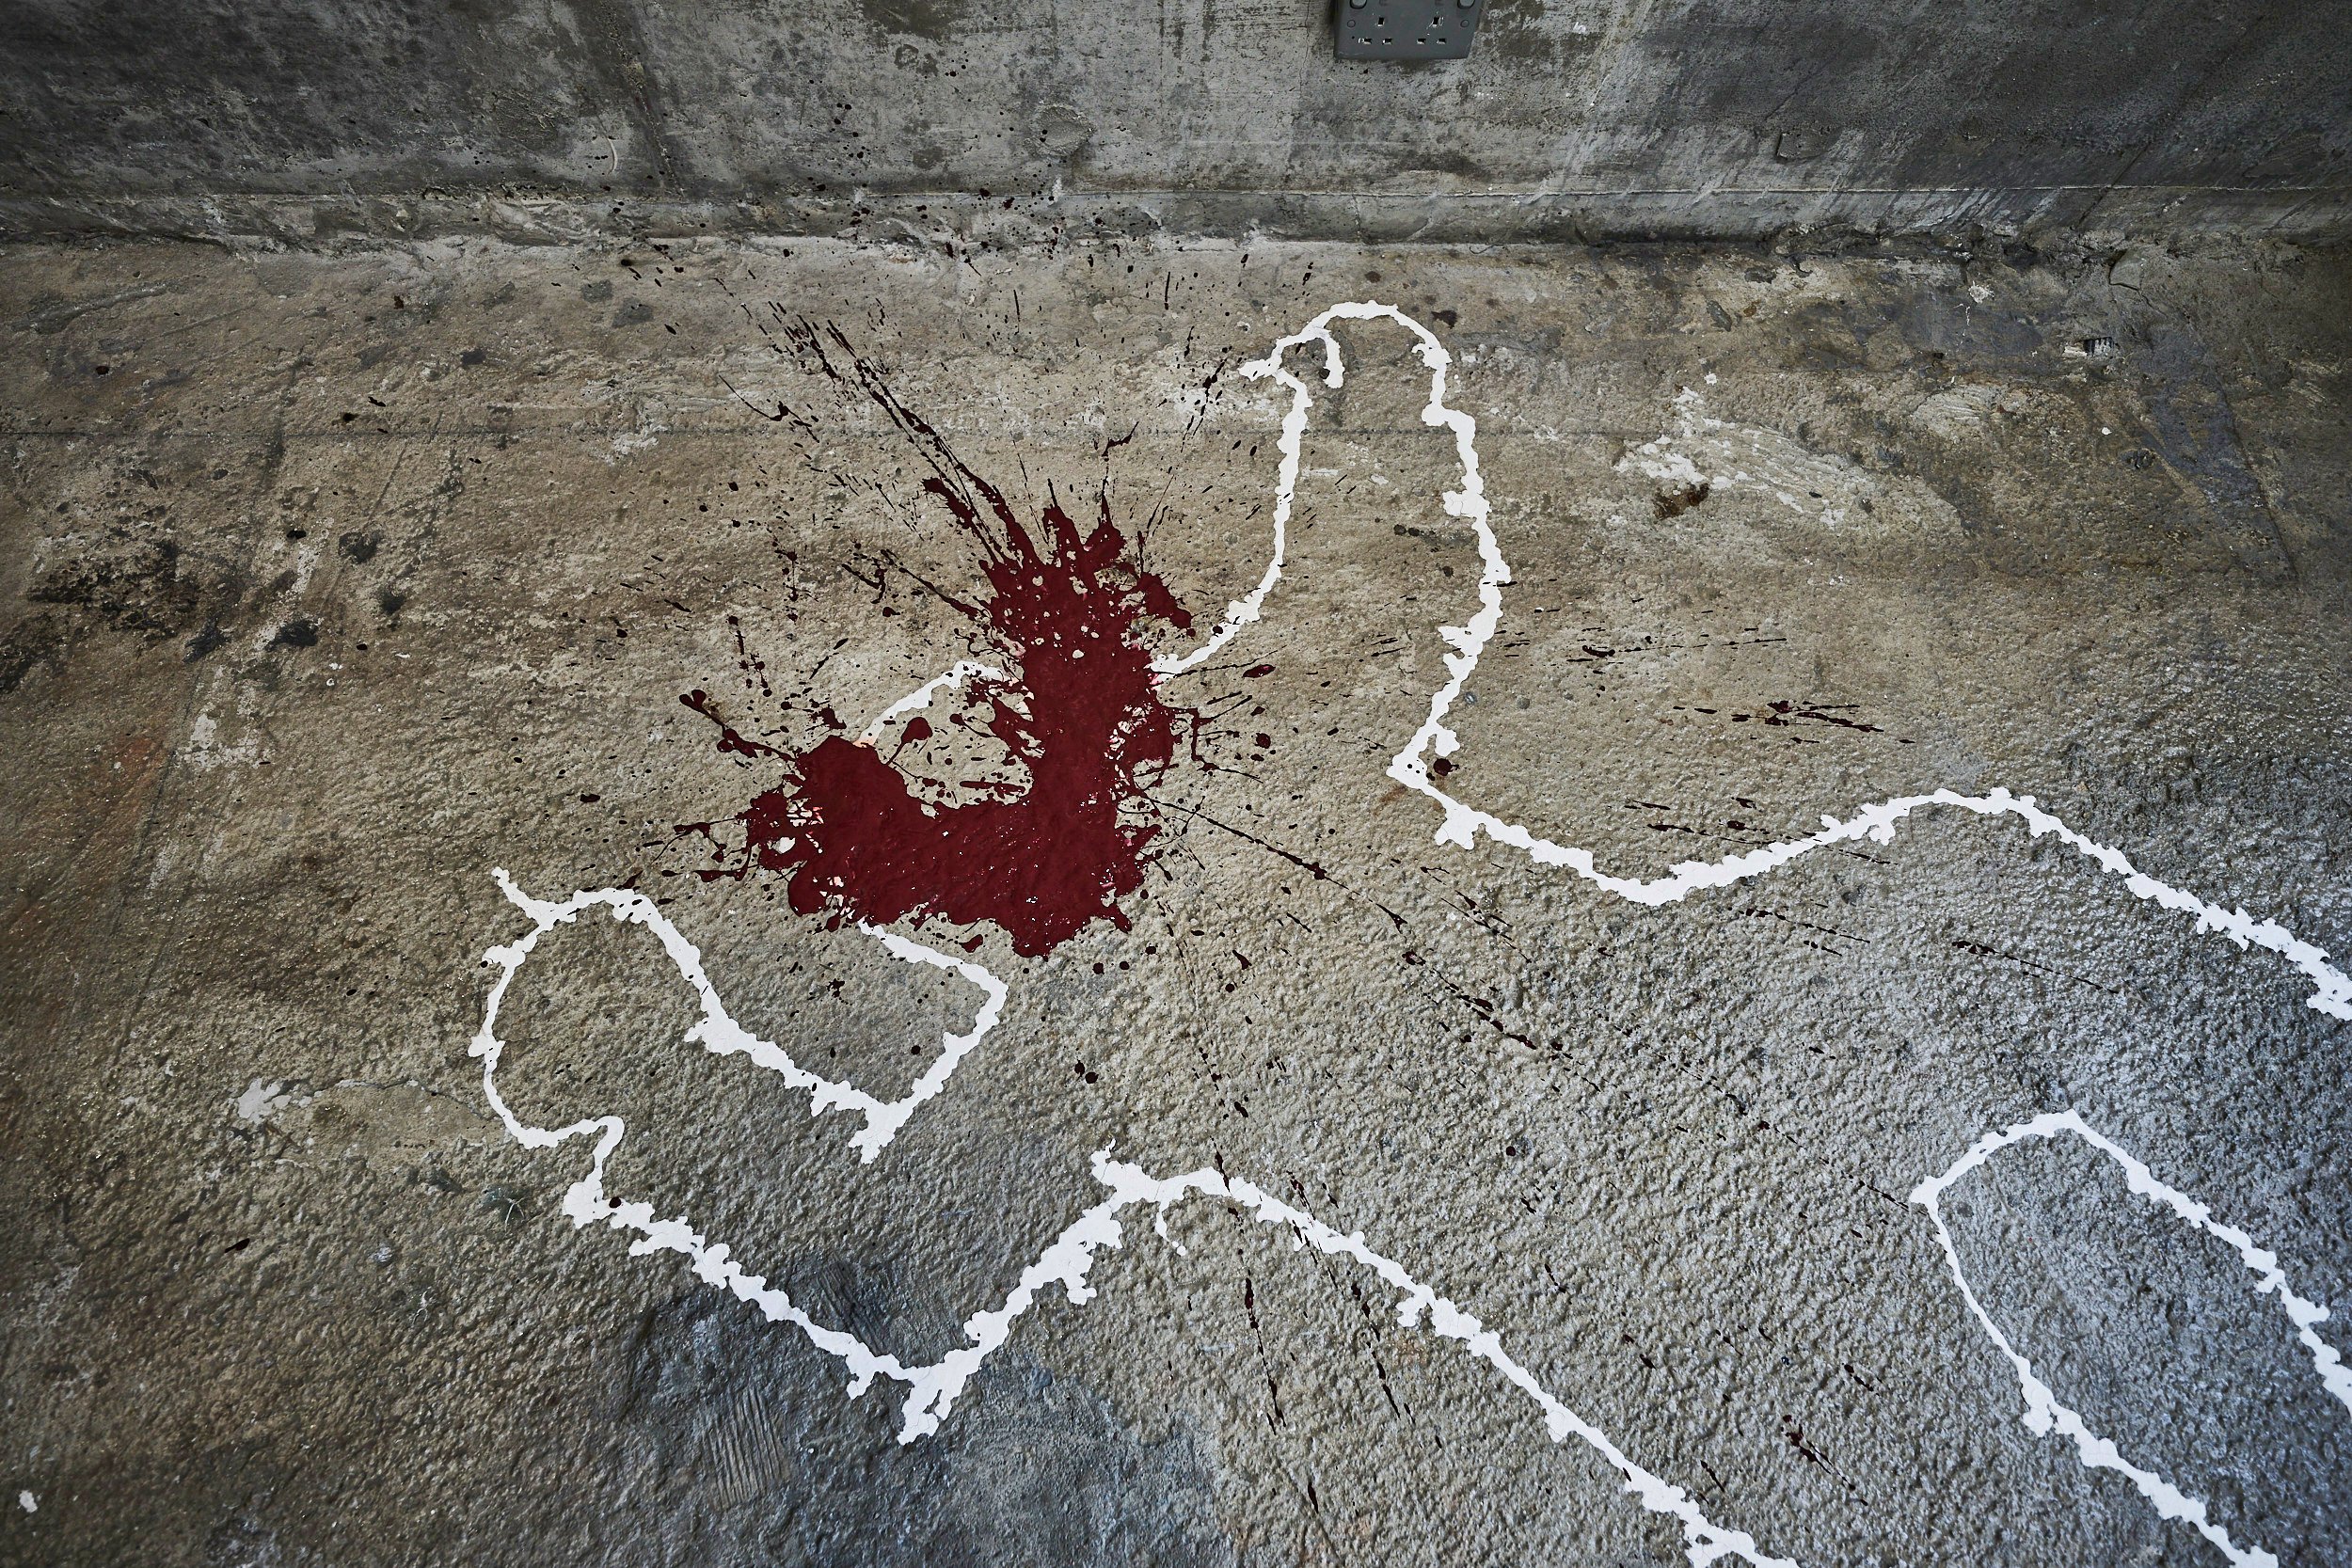 A Richard Hambleton “murder scene”. An exhibition of works by the late artist, a pioneer of New York’s street art scene who is often grouped with giants of modern art such as Keith Haring and Jean-Michel Basquiat, is now on show in Hong Kong. Photo: Courtesy of HKwalls